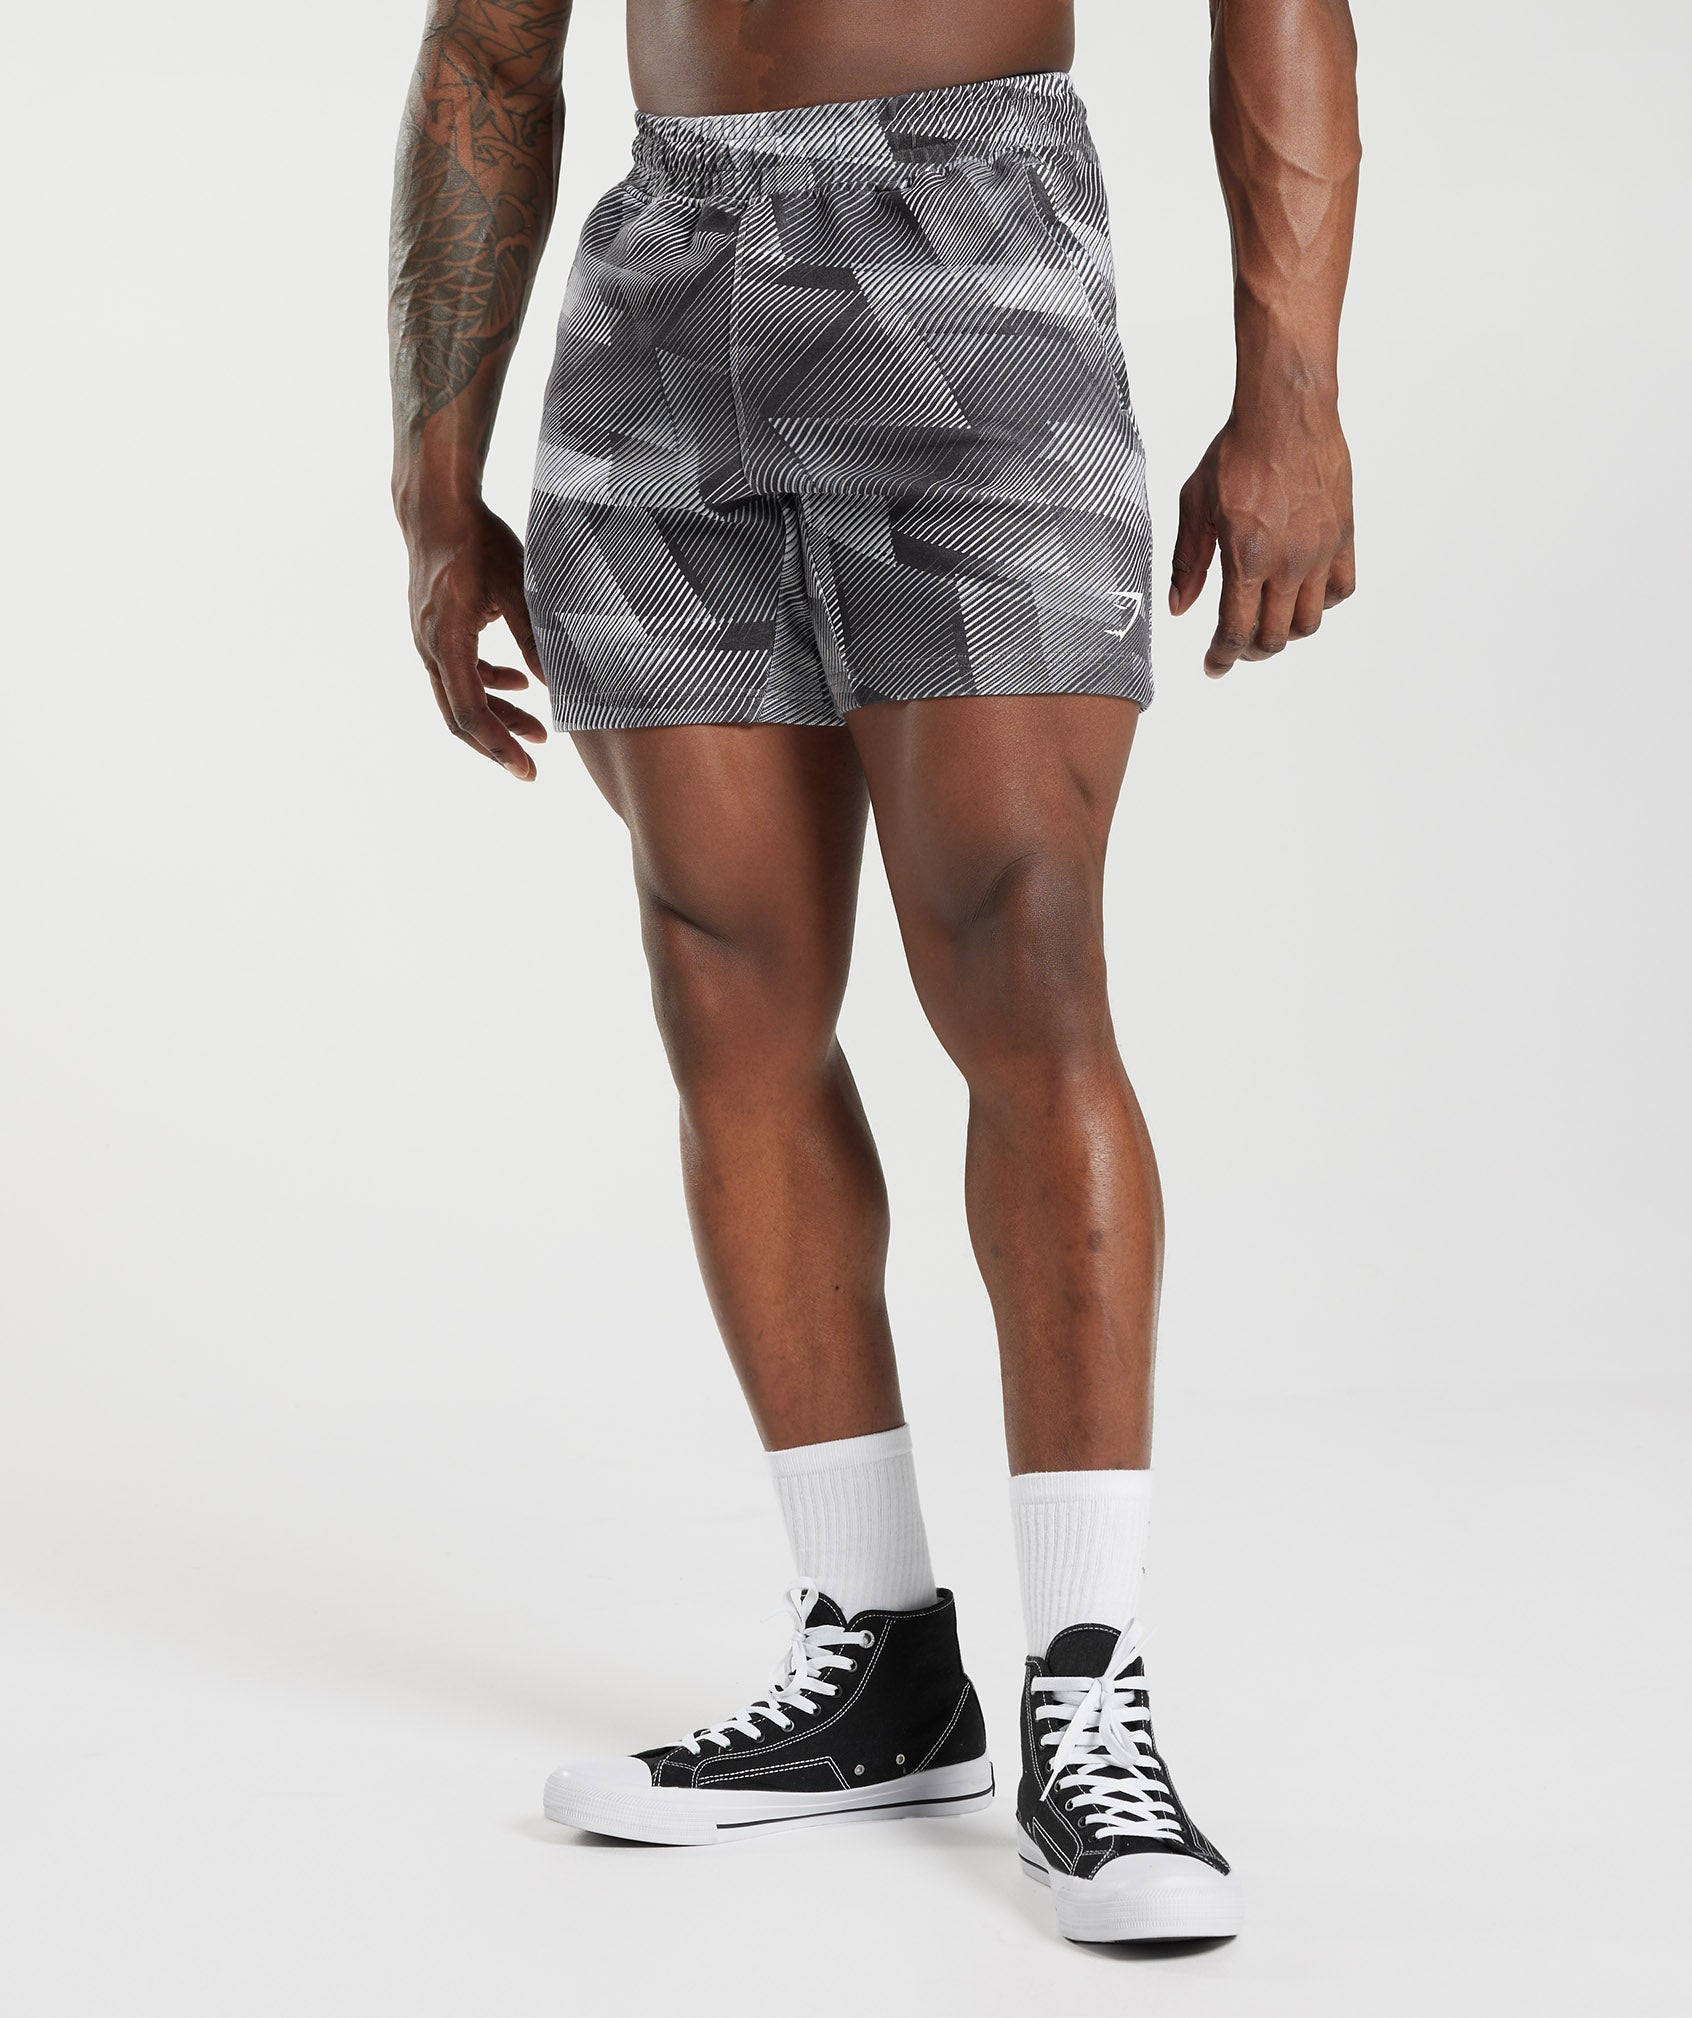 React 7" Shorts in Silhouette Grey